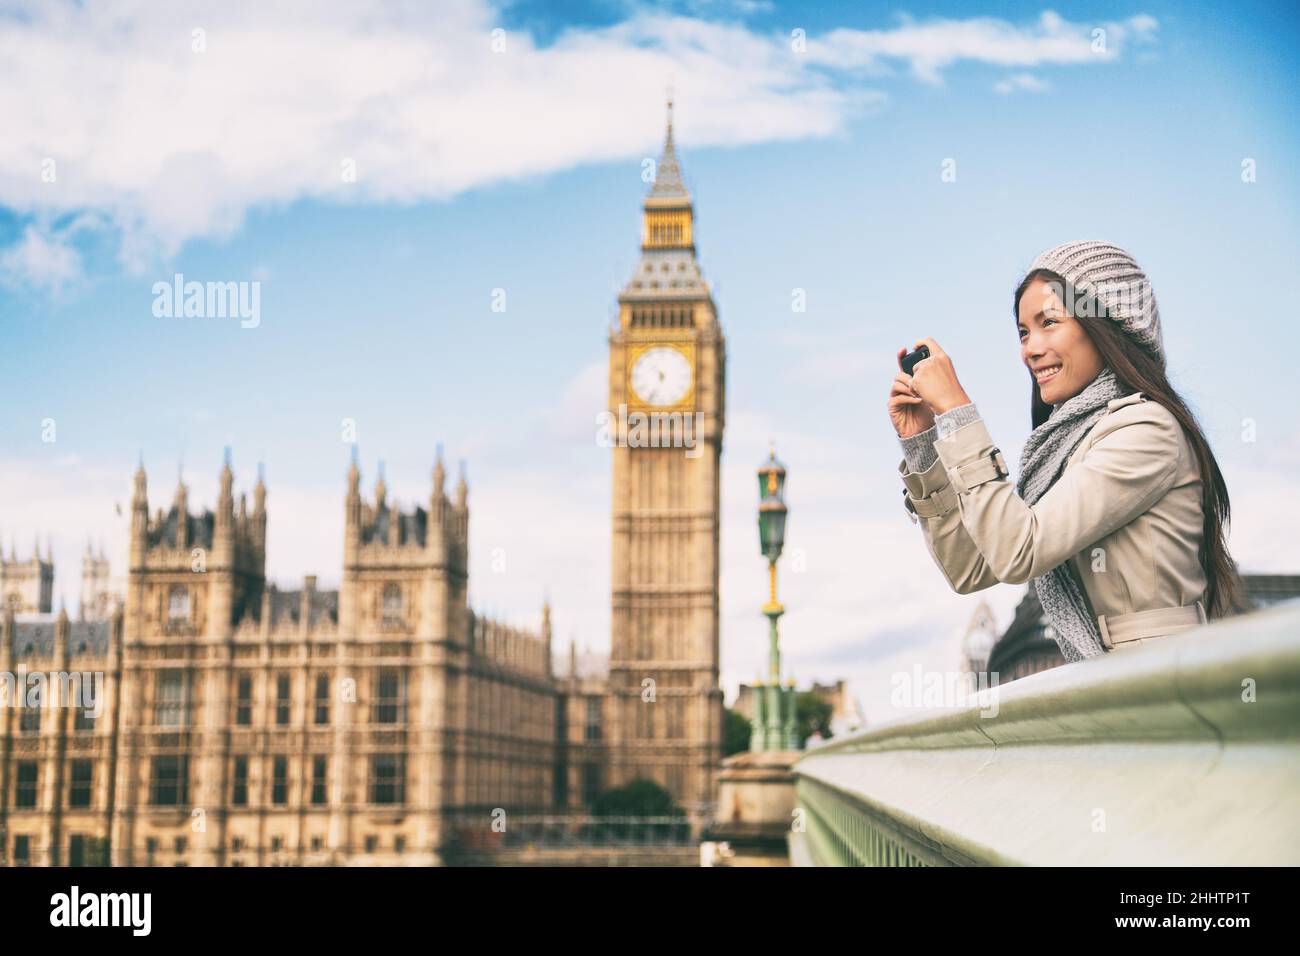 Travel tourist in london sightseeing taking photo pictures near Big Ben. Woman holding smart phone camera smiling happy near Palace of Westminster Stock Photo